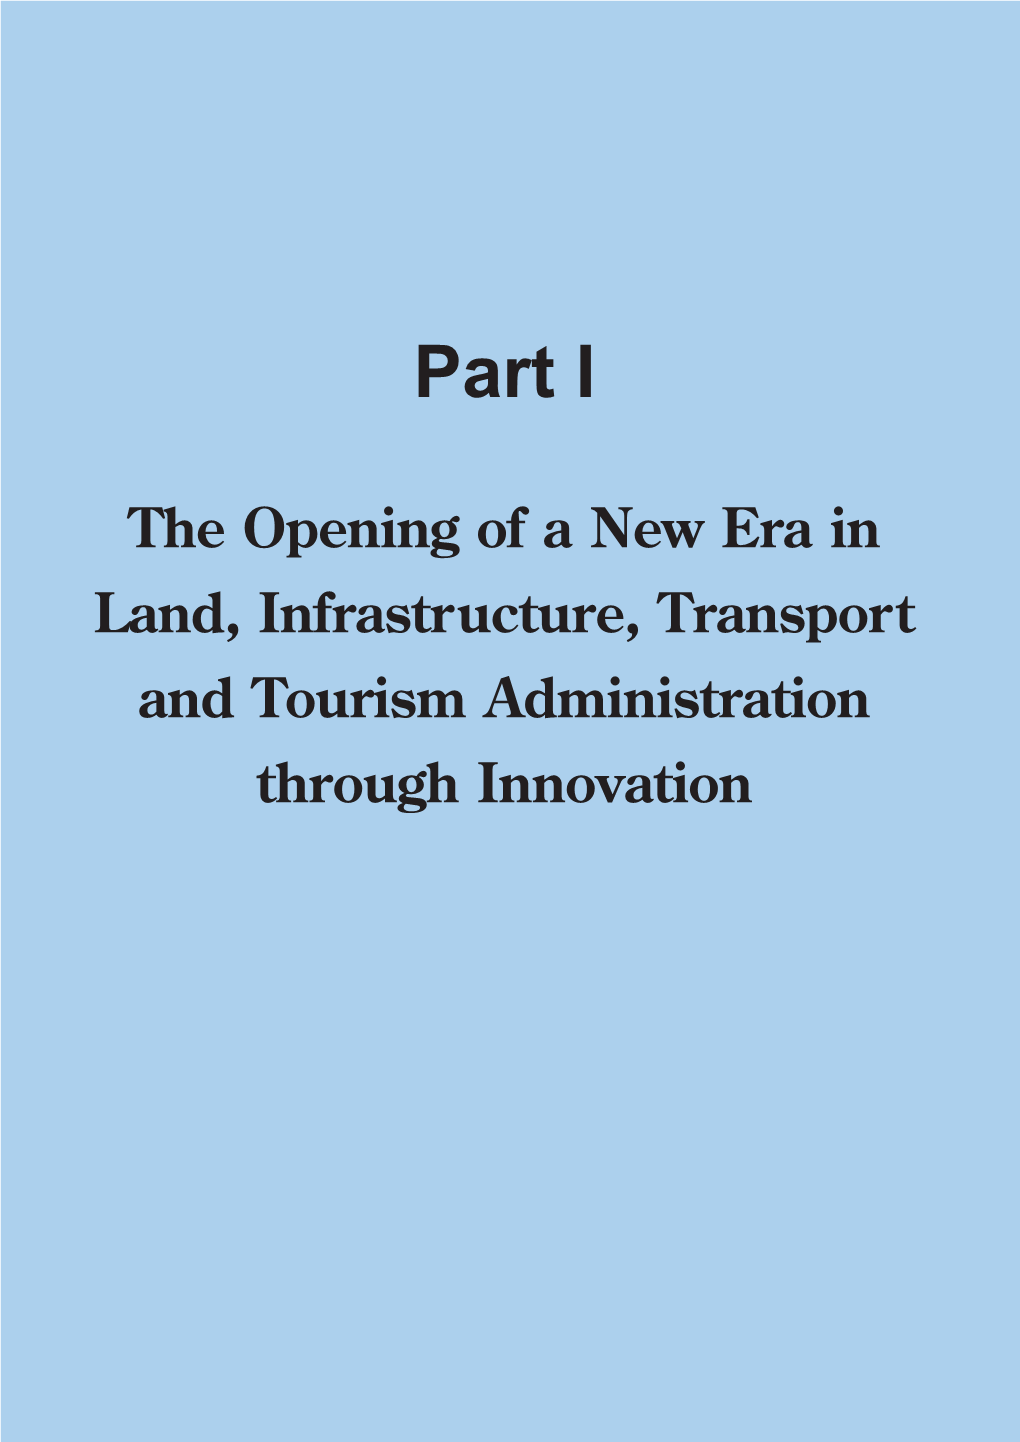 Chapter 1. Development and Innovation in Japan